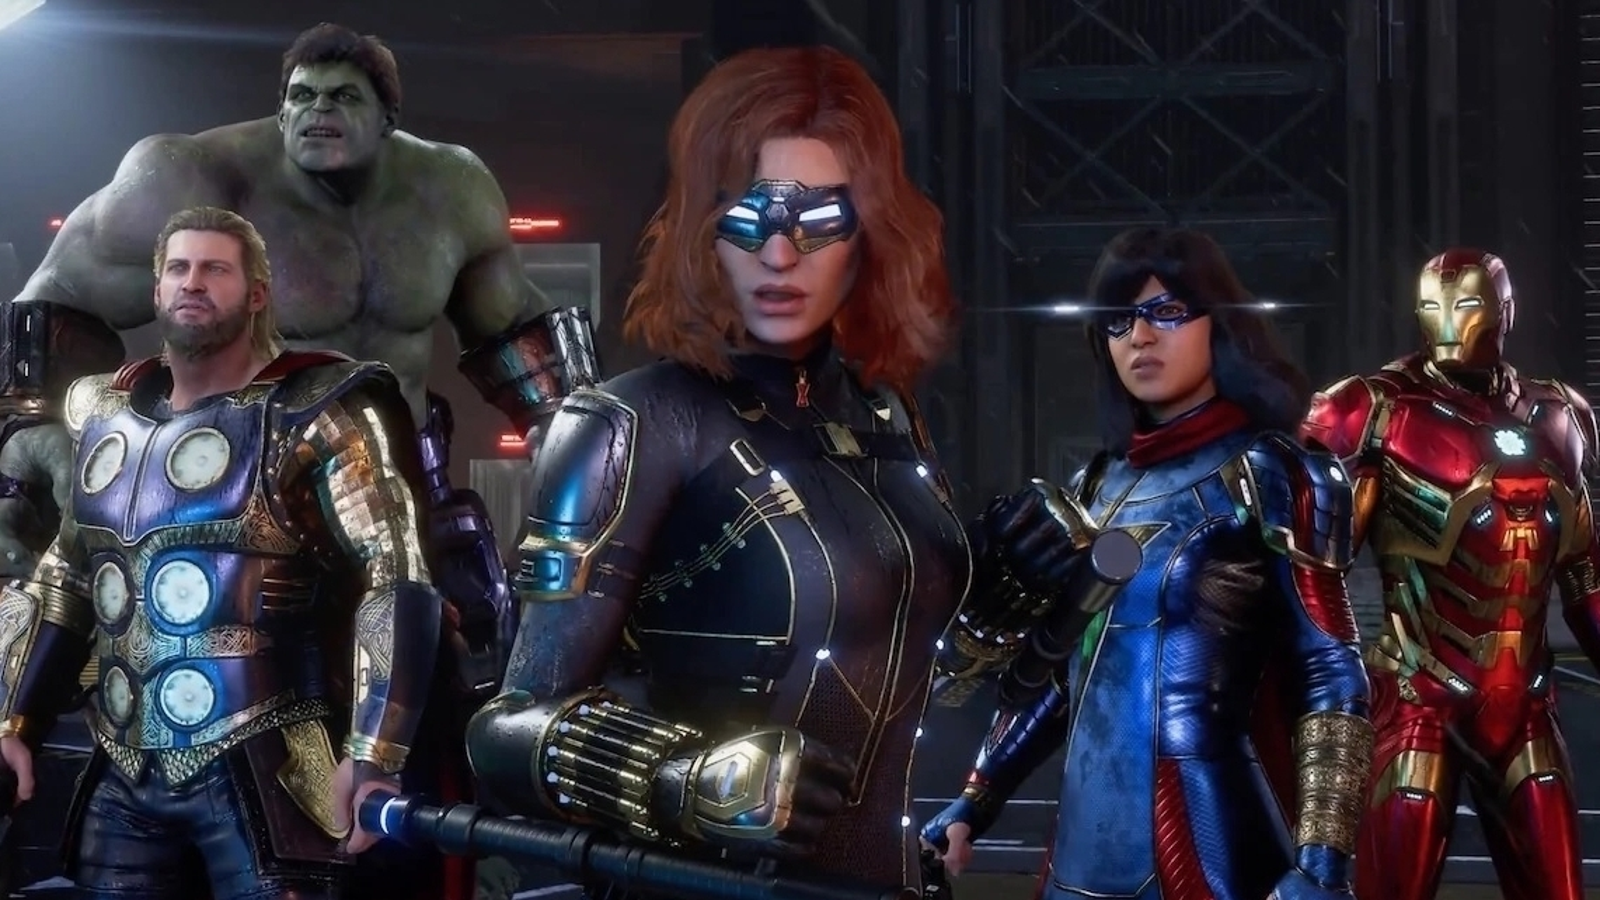 A Marvel multiplayer game for PS5 is reportedly in the works